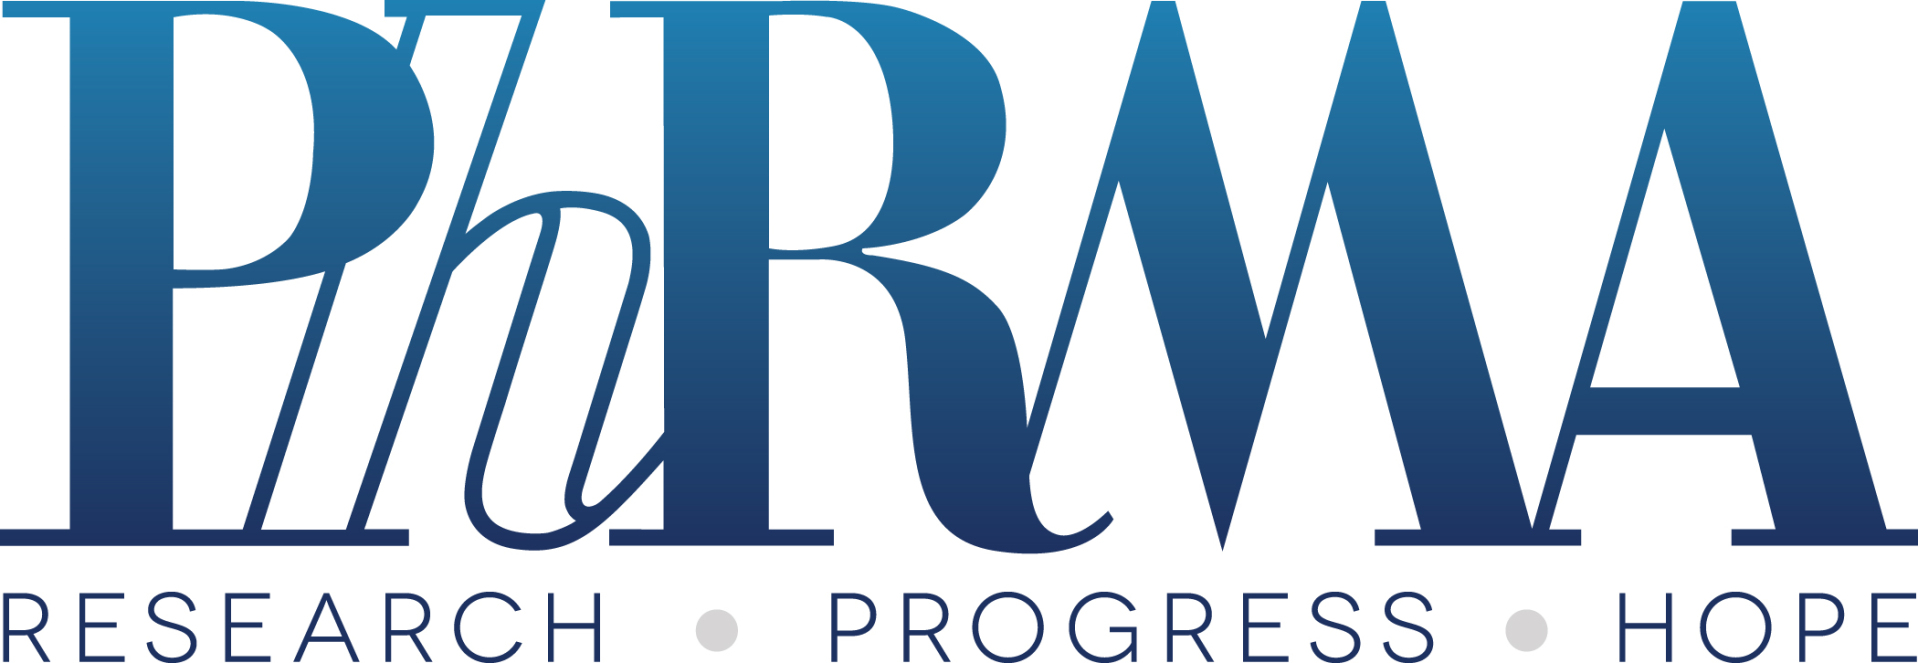 PhRMA logo with a tagline of research, progress, hope at the bottom